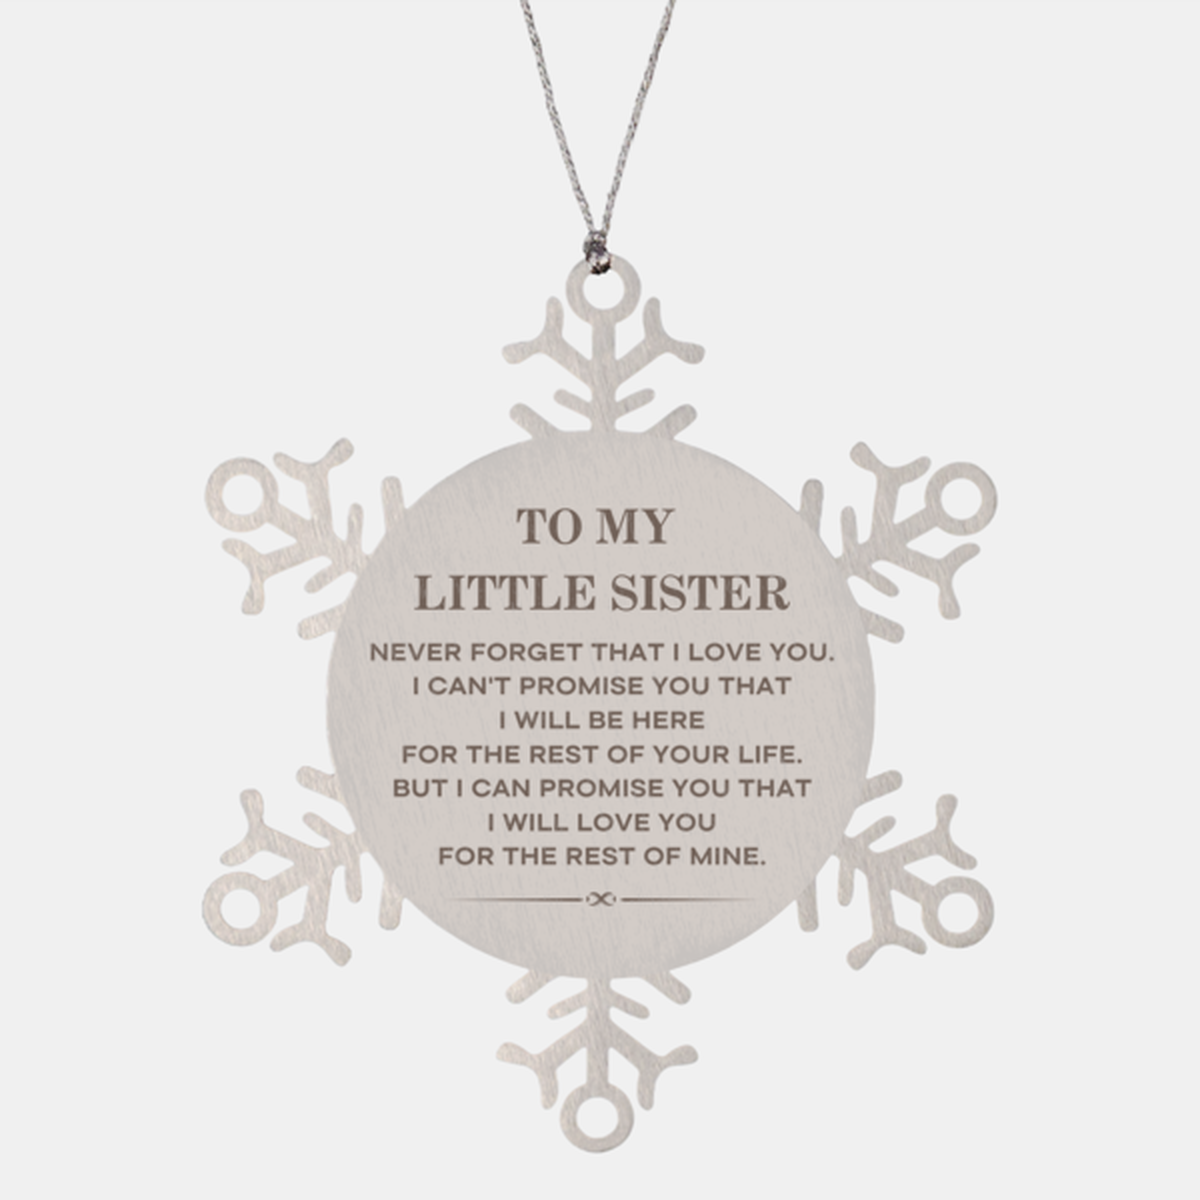 To My Little Sister Gifts, I will love you for the rest of mine, Love Little Sister Ornament, Birthday Christmas Unique Snowflake Ornament For Little Sister